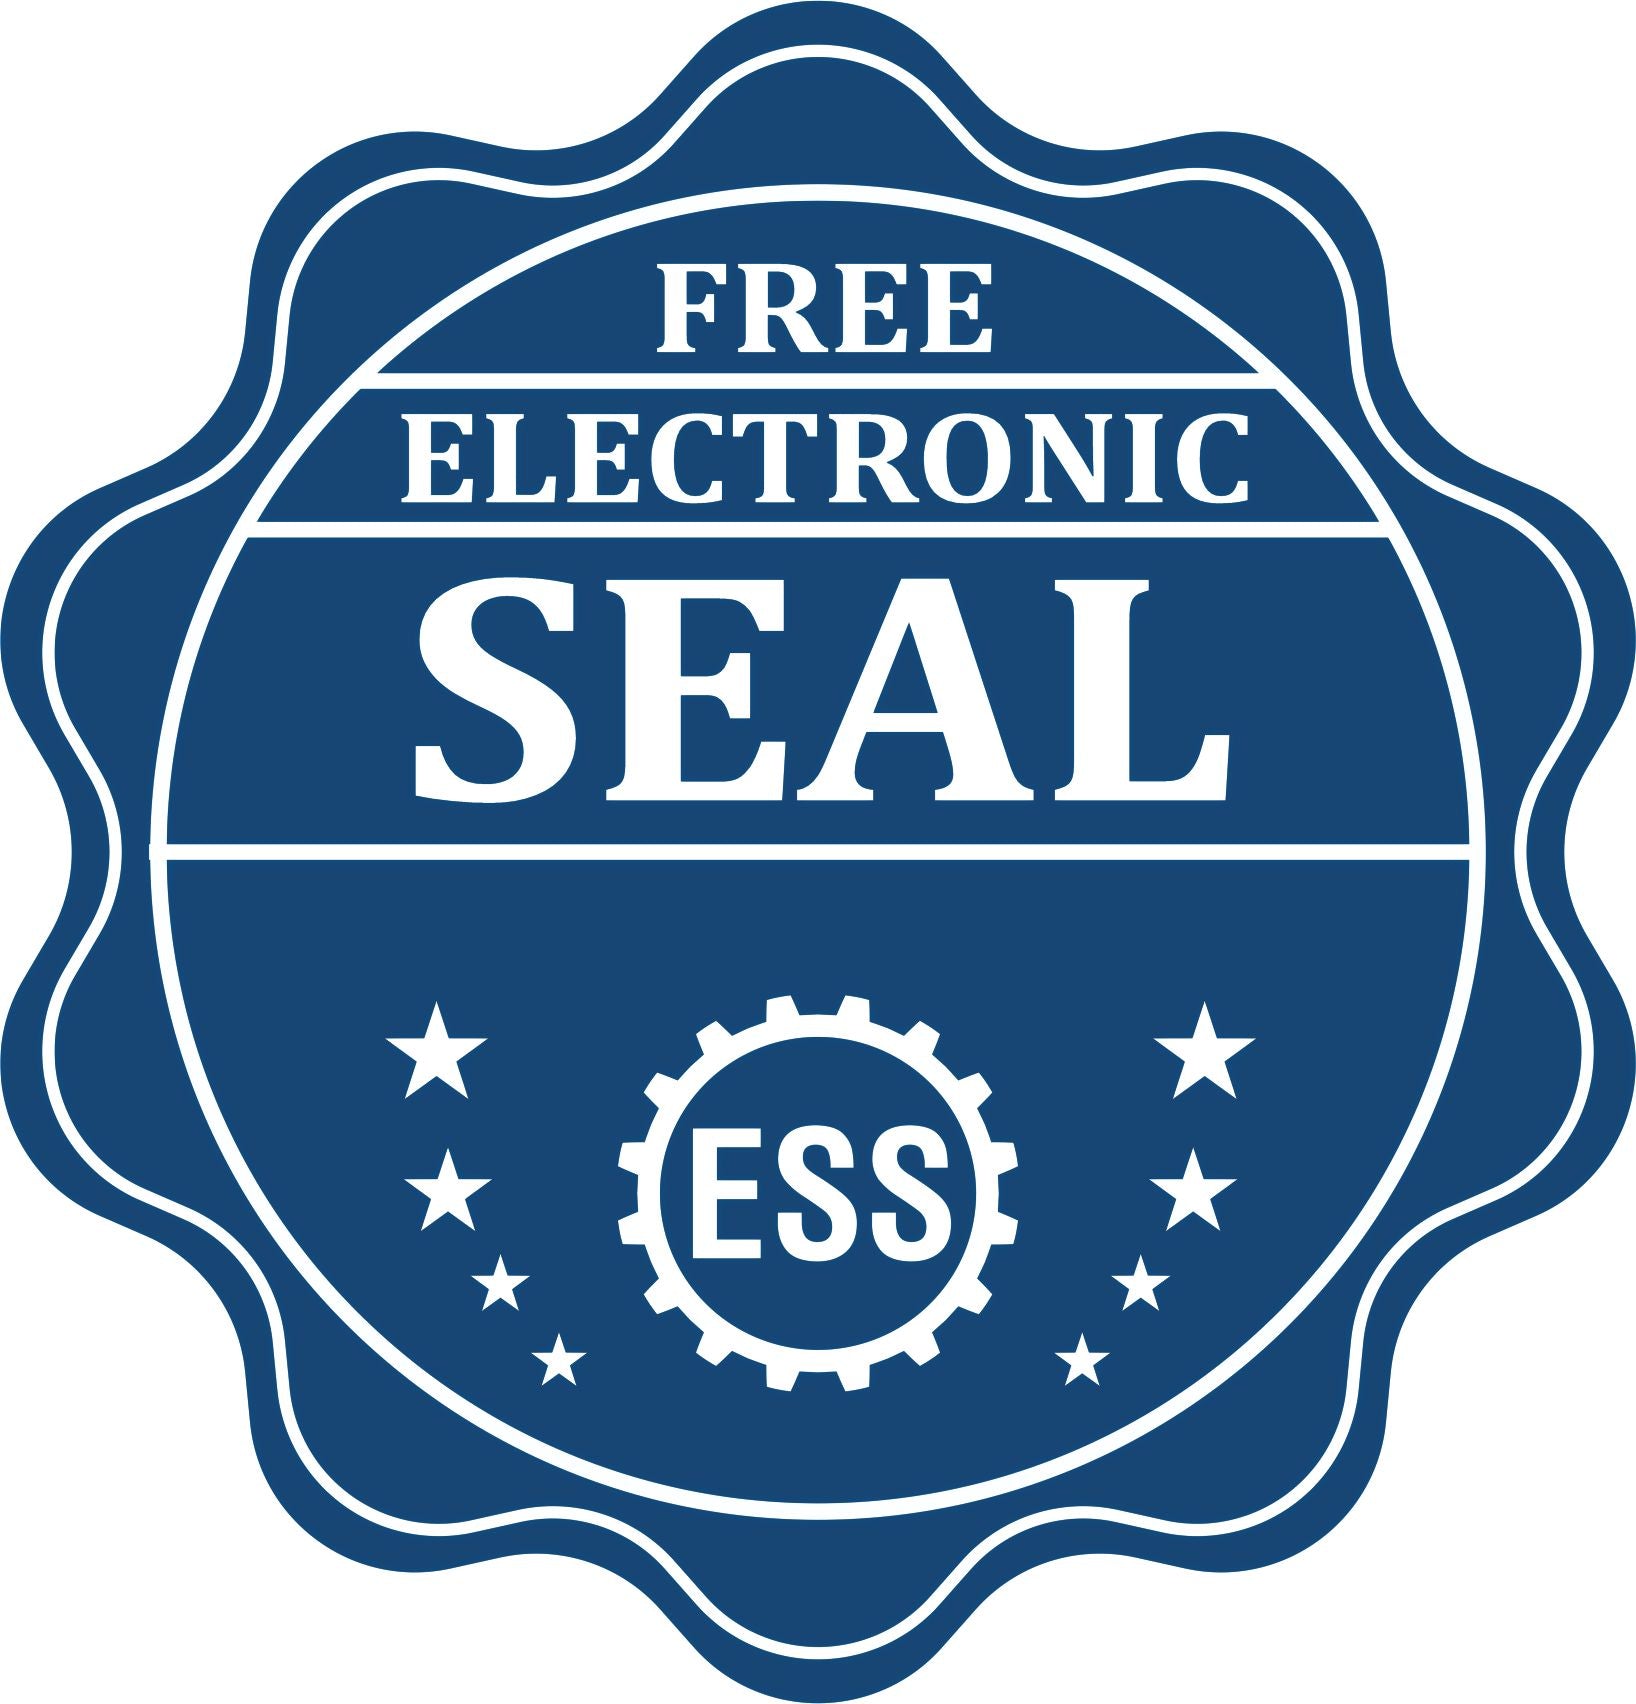 A badge showing a free electronic seal for the Gift District of Columbia Geologist Seal with stars and the ESS gear on the emblem.